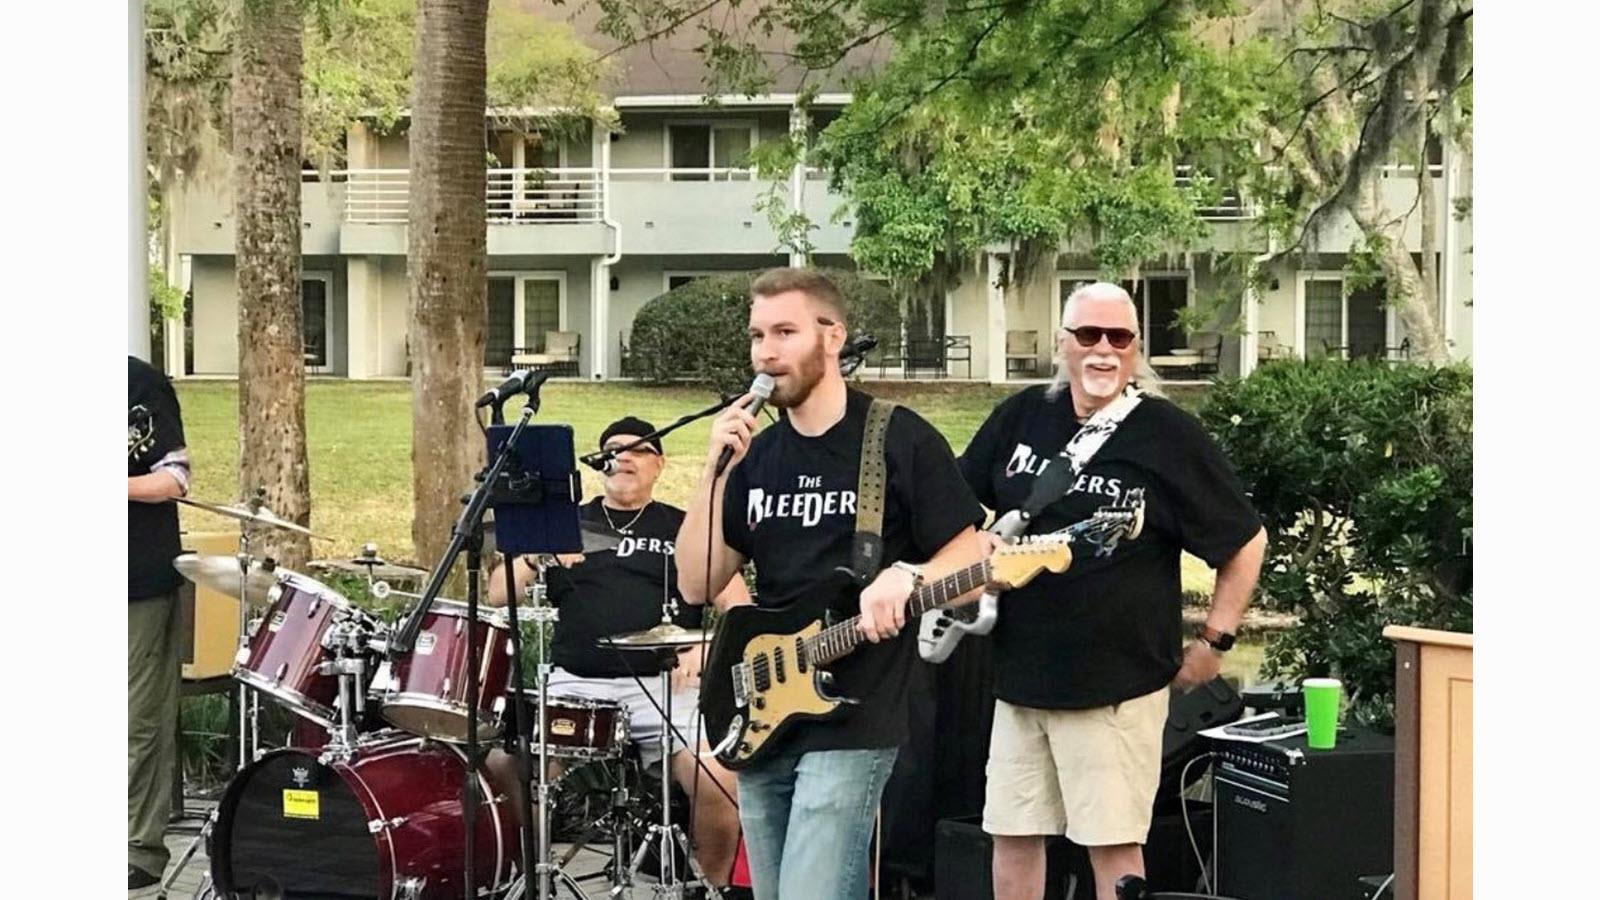 The Bleeders Cover band perform an outdoor show